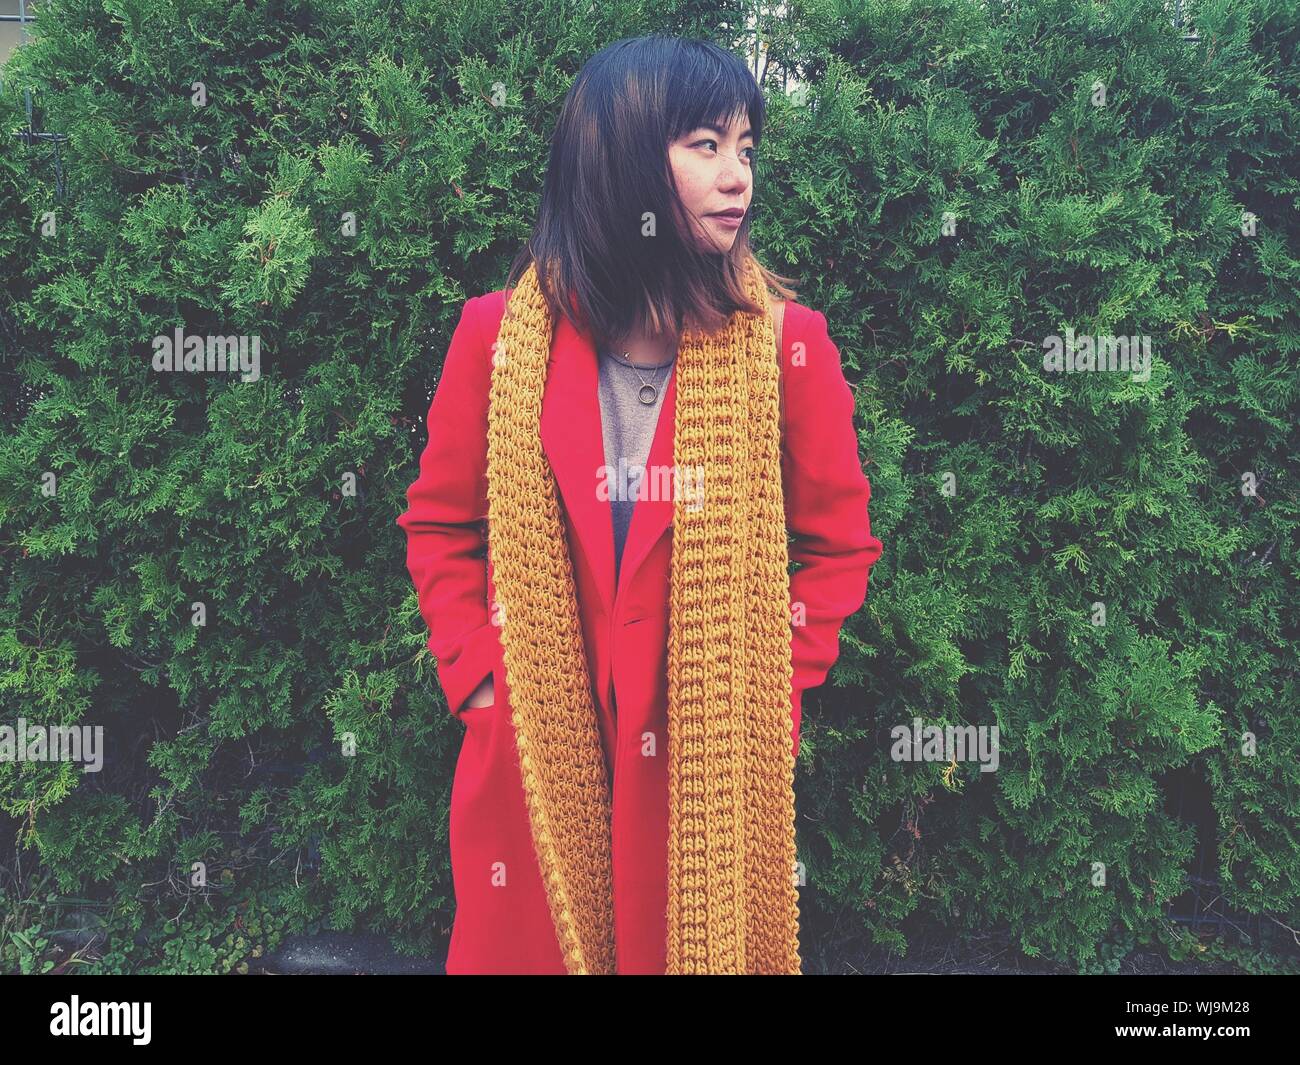 Woman Wearing Red Overcoat While Standing By Plants Stock Photo